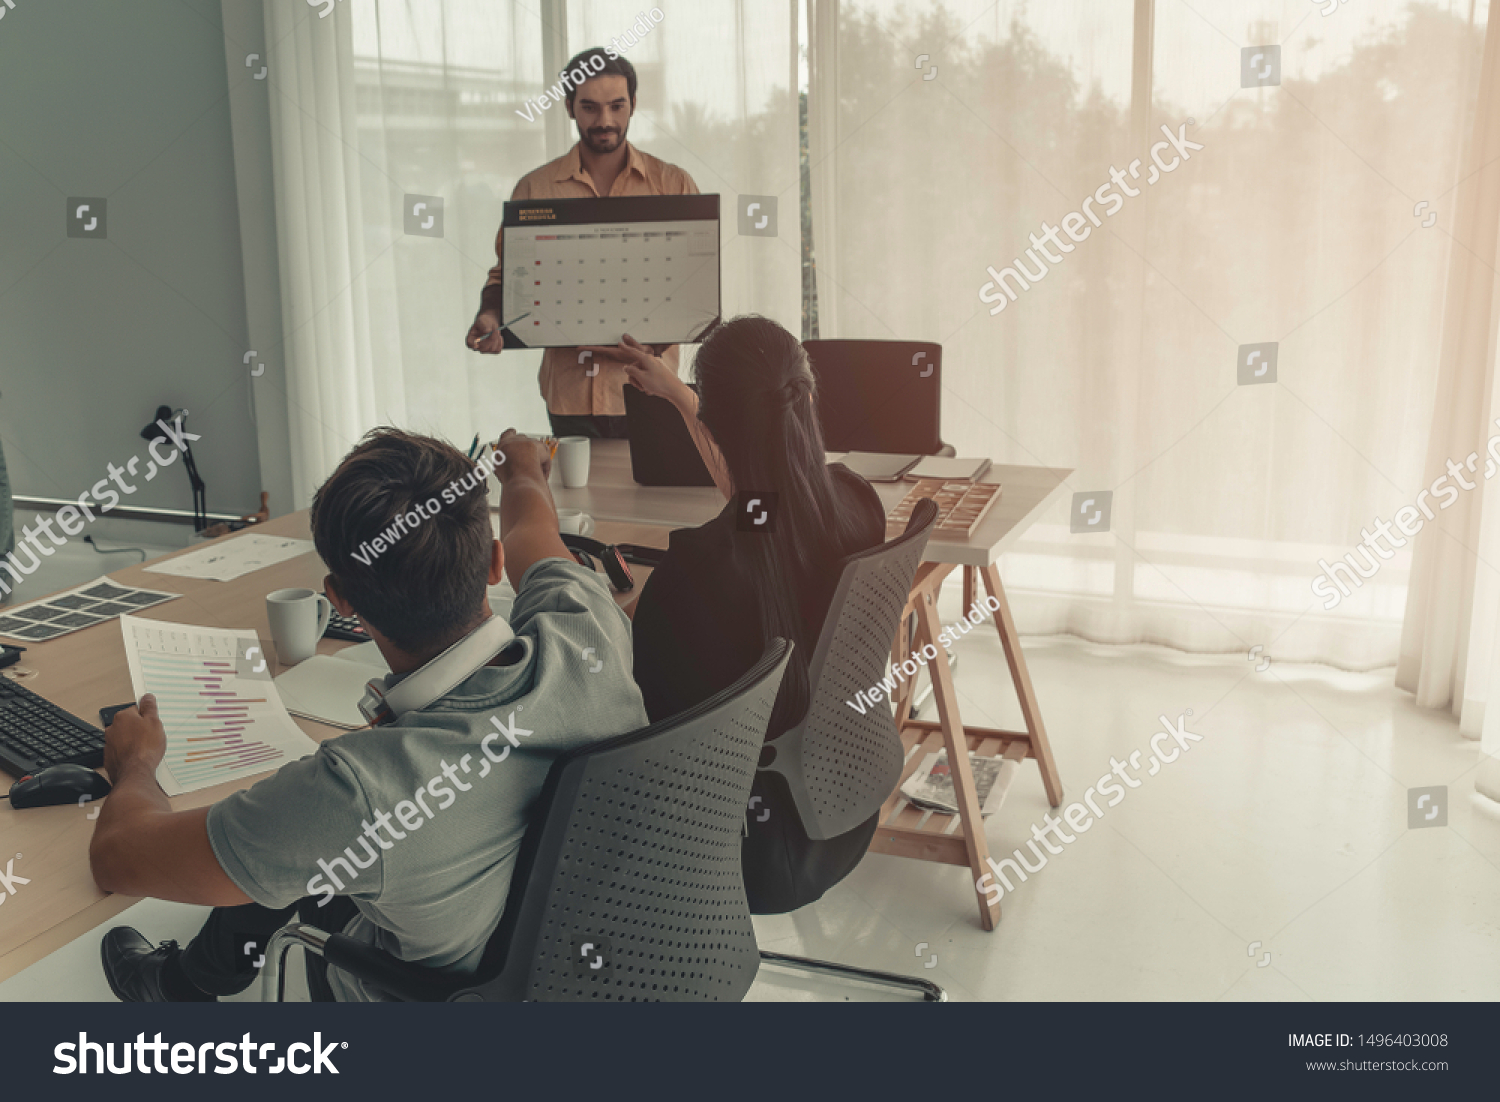 Hispanic businessman holding papers hands and smiling.Young team of coworkers making great business discussion in modern coworking office.Teamwork people concept.Horizontal, blurred background, flares #1496403008